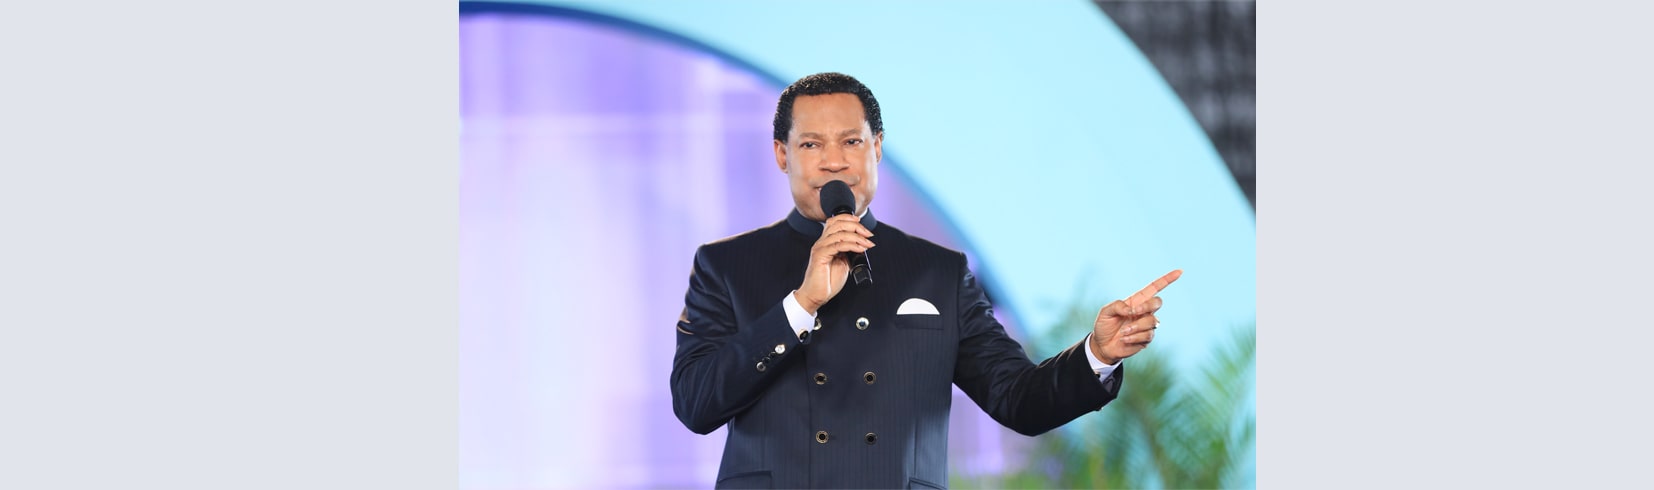 AUTHORITY OVER ALL THE POWER OF THE ENEMY – RHAPSODY OF REALITIES [MON MAR 13]